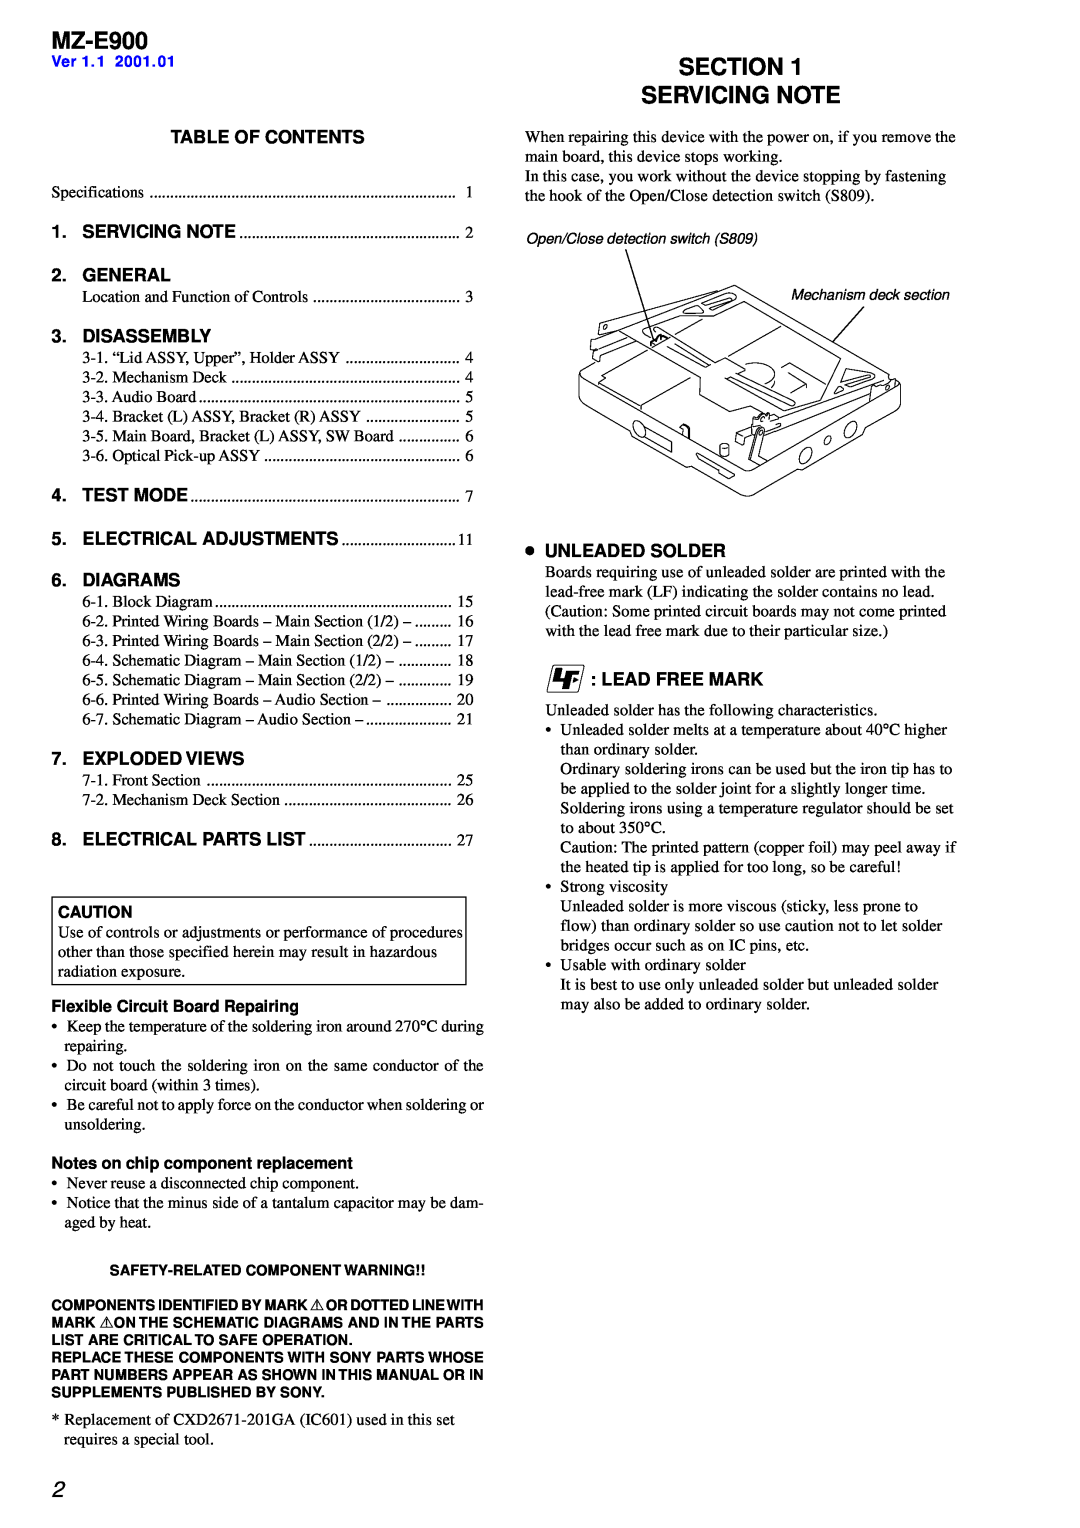 Sony MZ-E900 specifications Section Servicing Note, Ver, Table Of Contents, General, Disassembly, Diagrams, Exploded Views 